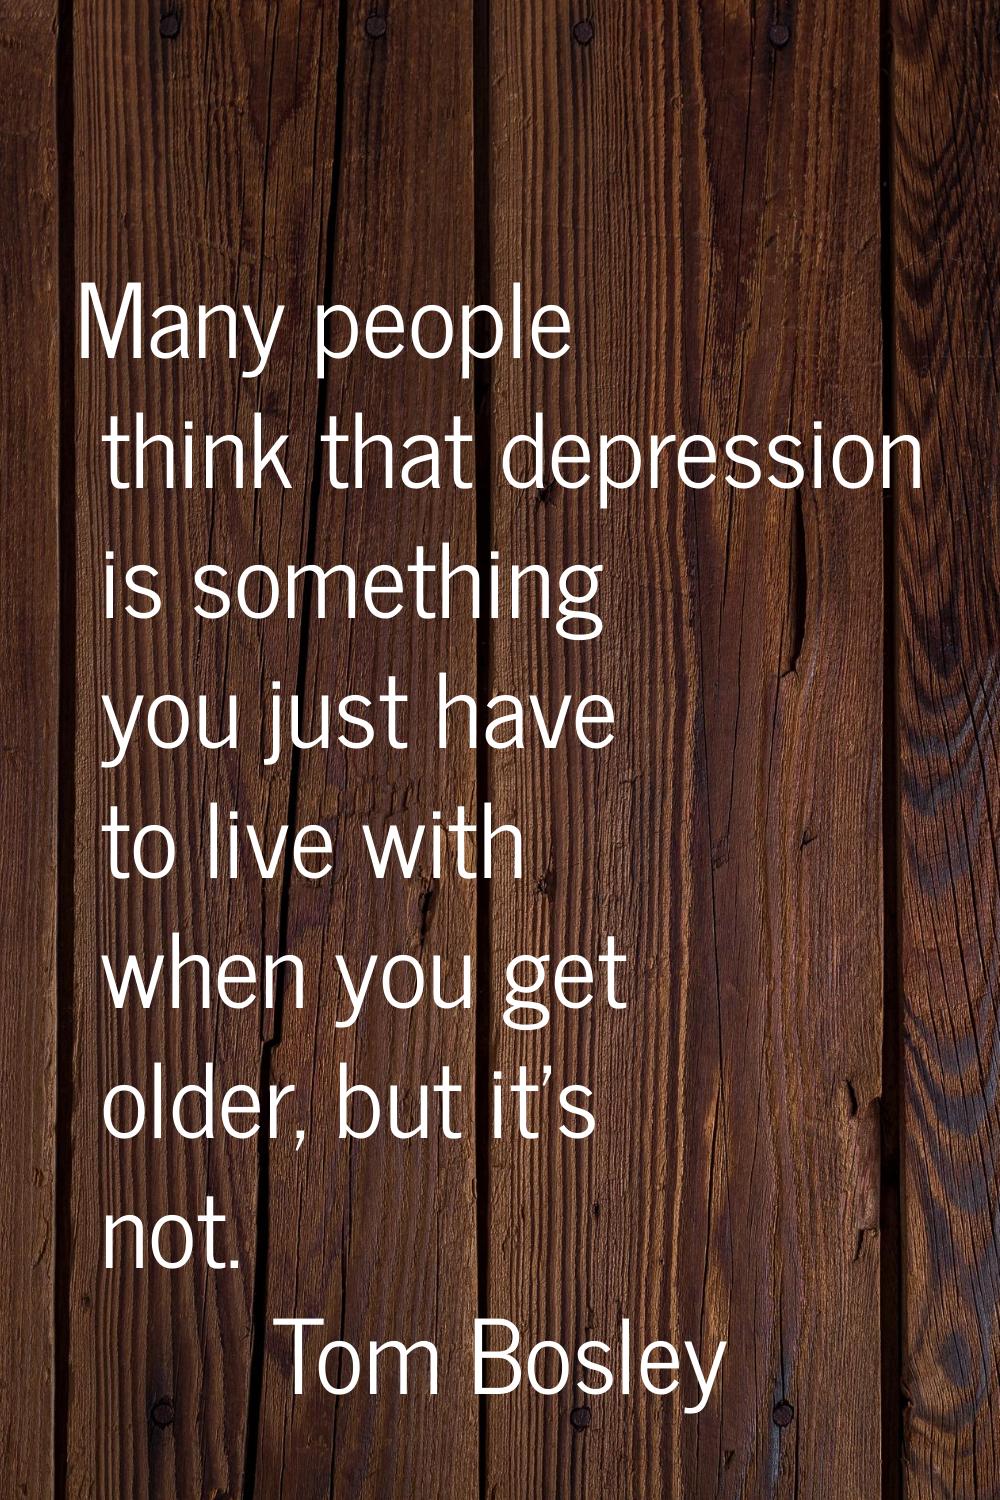 Many people think that depression is something you just have to live with when you get older, but i